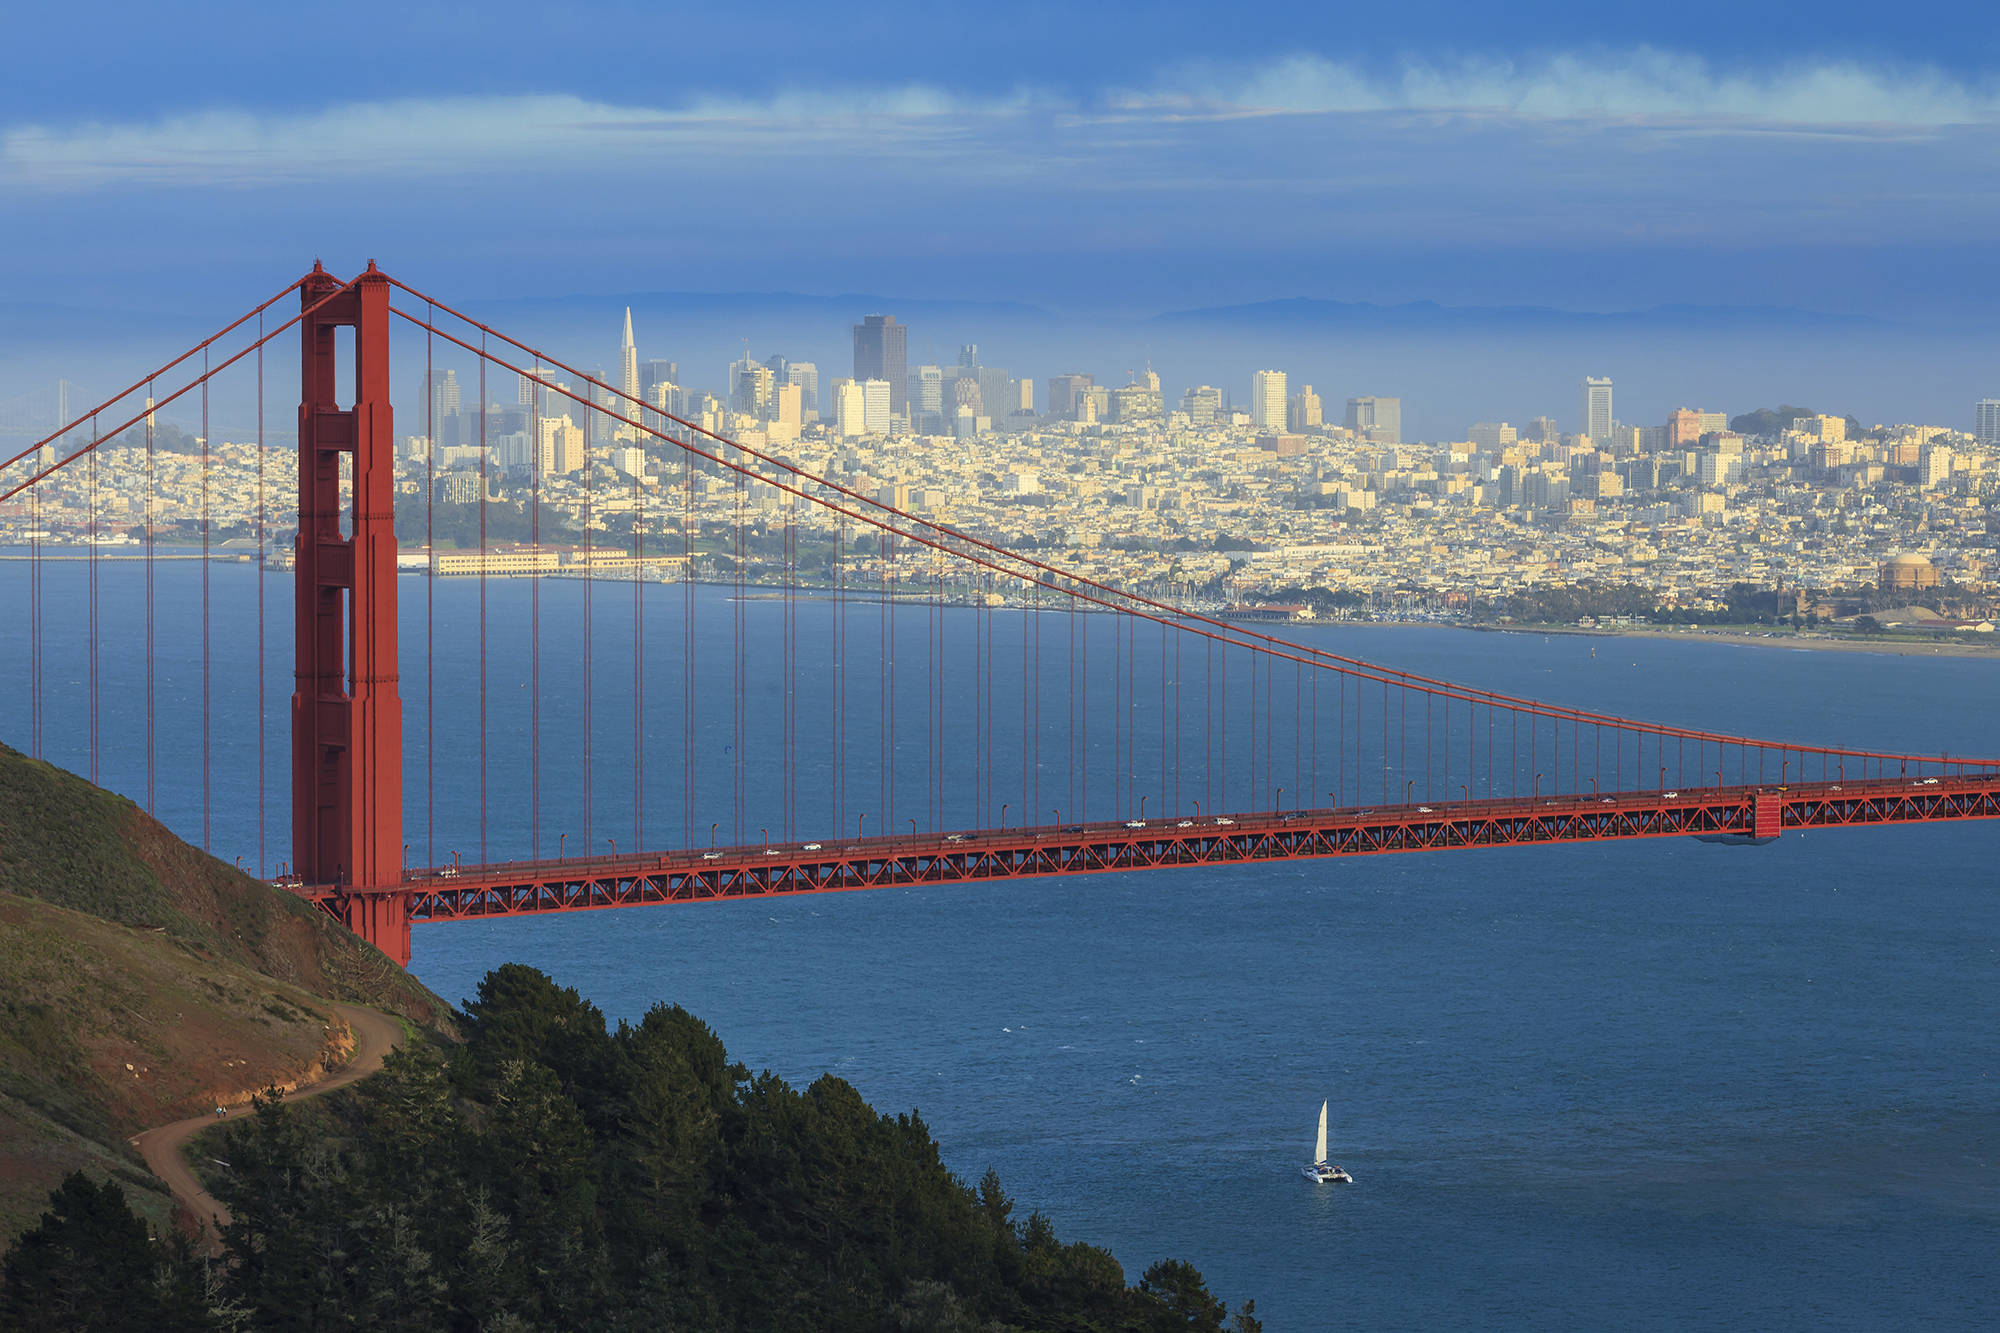 Picture of the Golden Gate Bridge with the city of San Francisco in the background